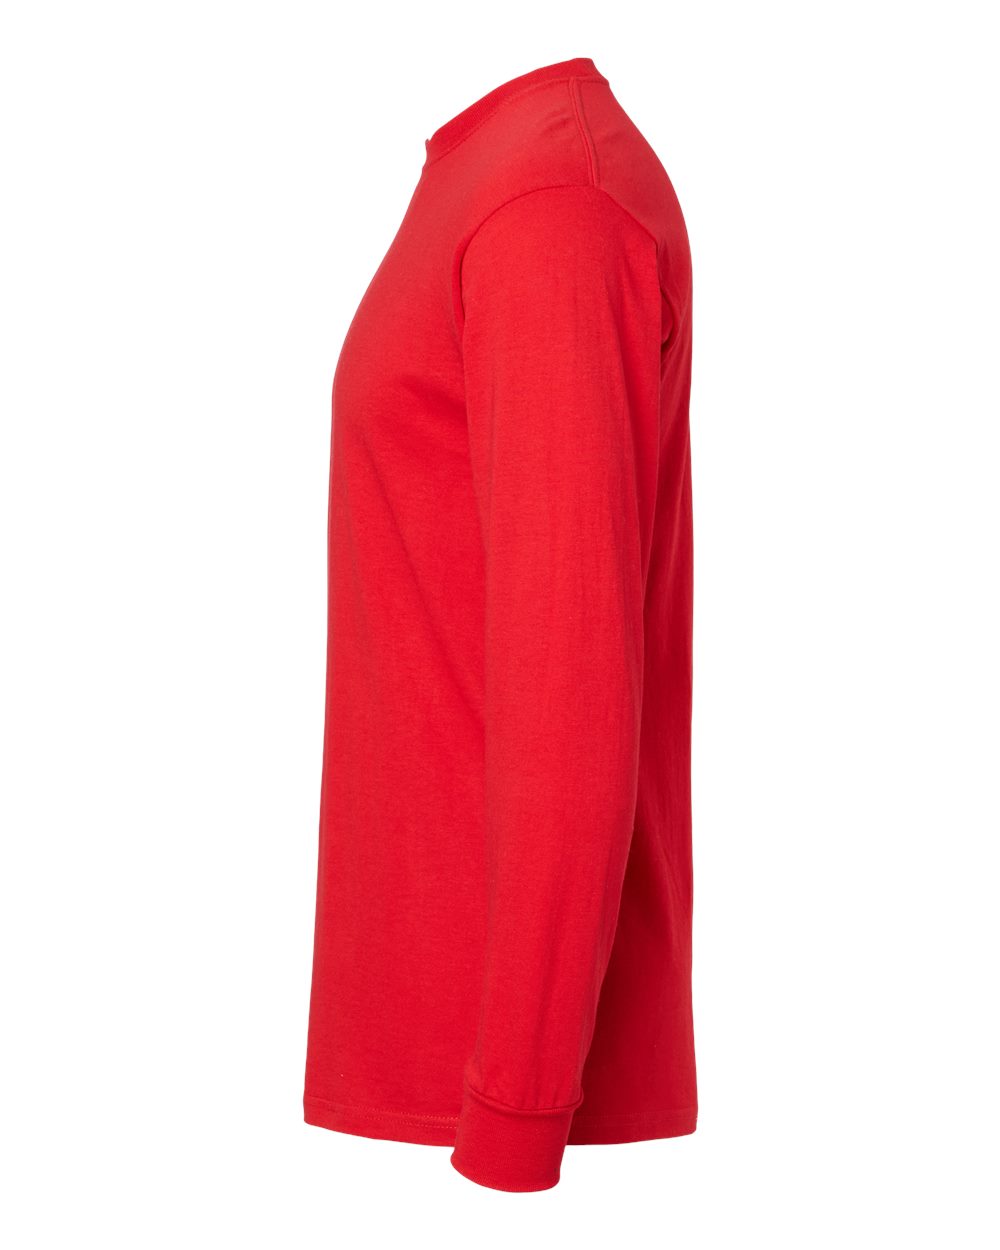 M&O Gold Soft Touch Long Sleeve T-Shirt 4820 #color_Deep Red